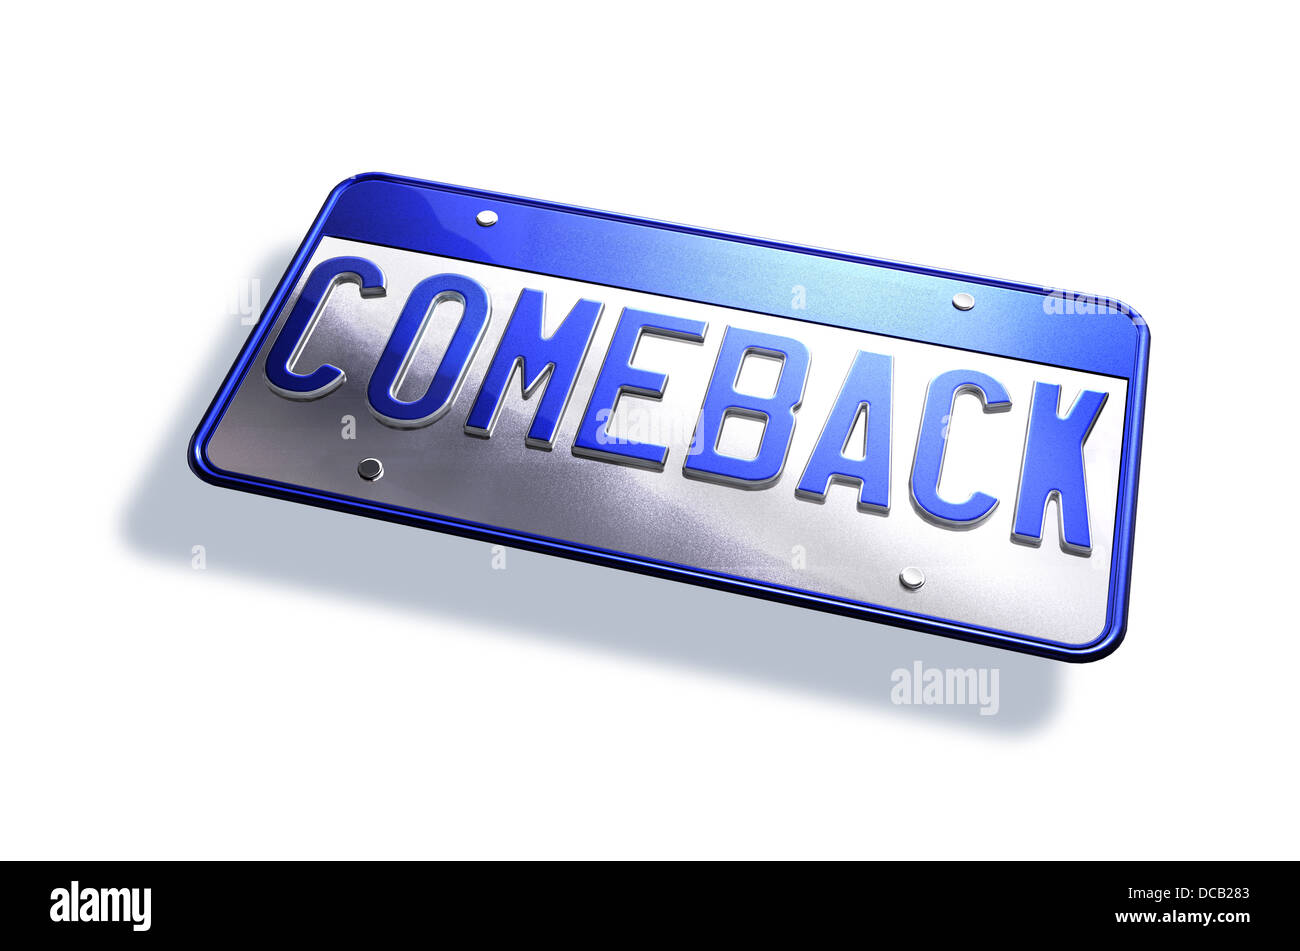 Car license plate, with the type 'comeback' on it. Isolated on white background, with drop shadow. Stock Photo